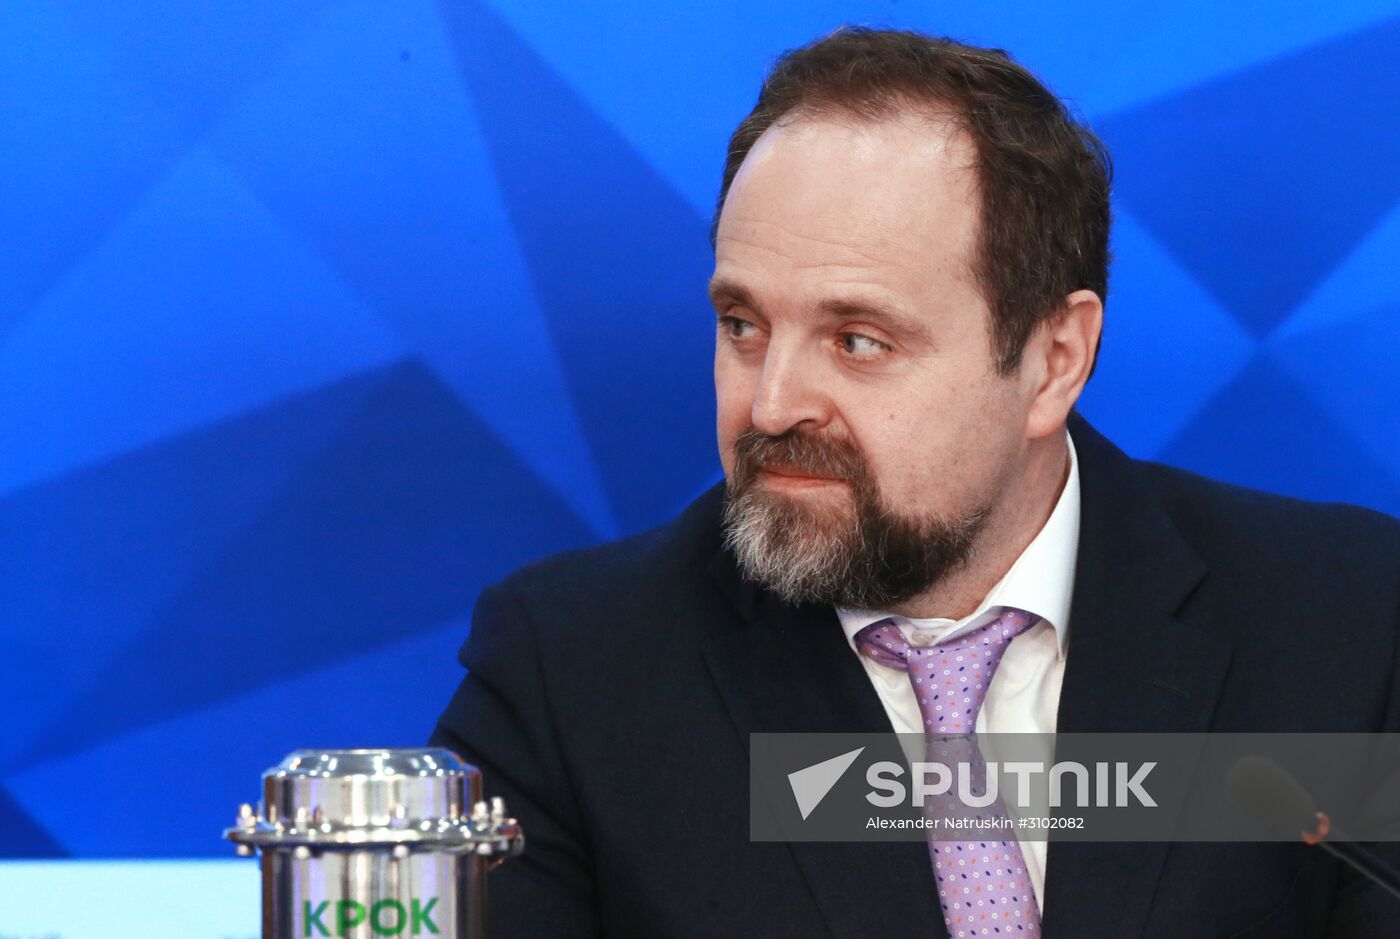 Press conference of Minister of Natural Resources and Environment Sergei Donskoy